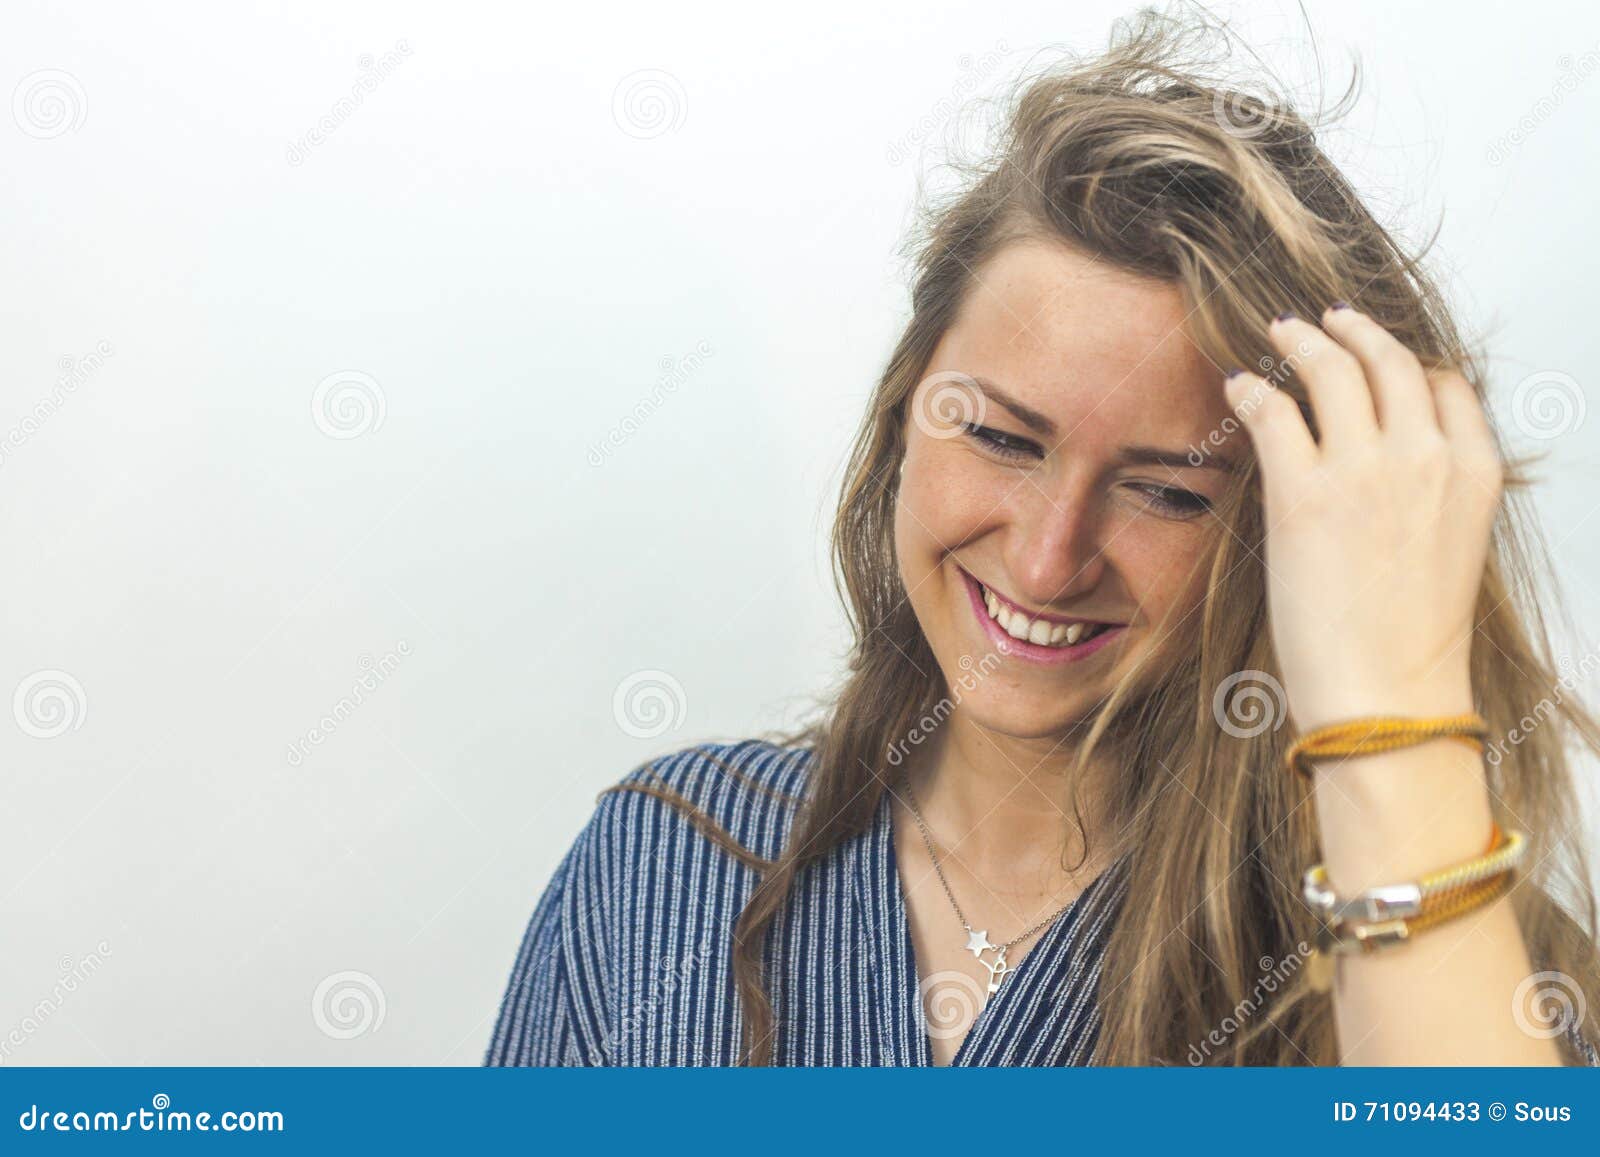 Close Up Portrait Of Smiling Beautiful Woman With Hair Motion Sh Stock